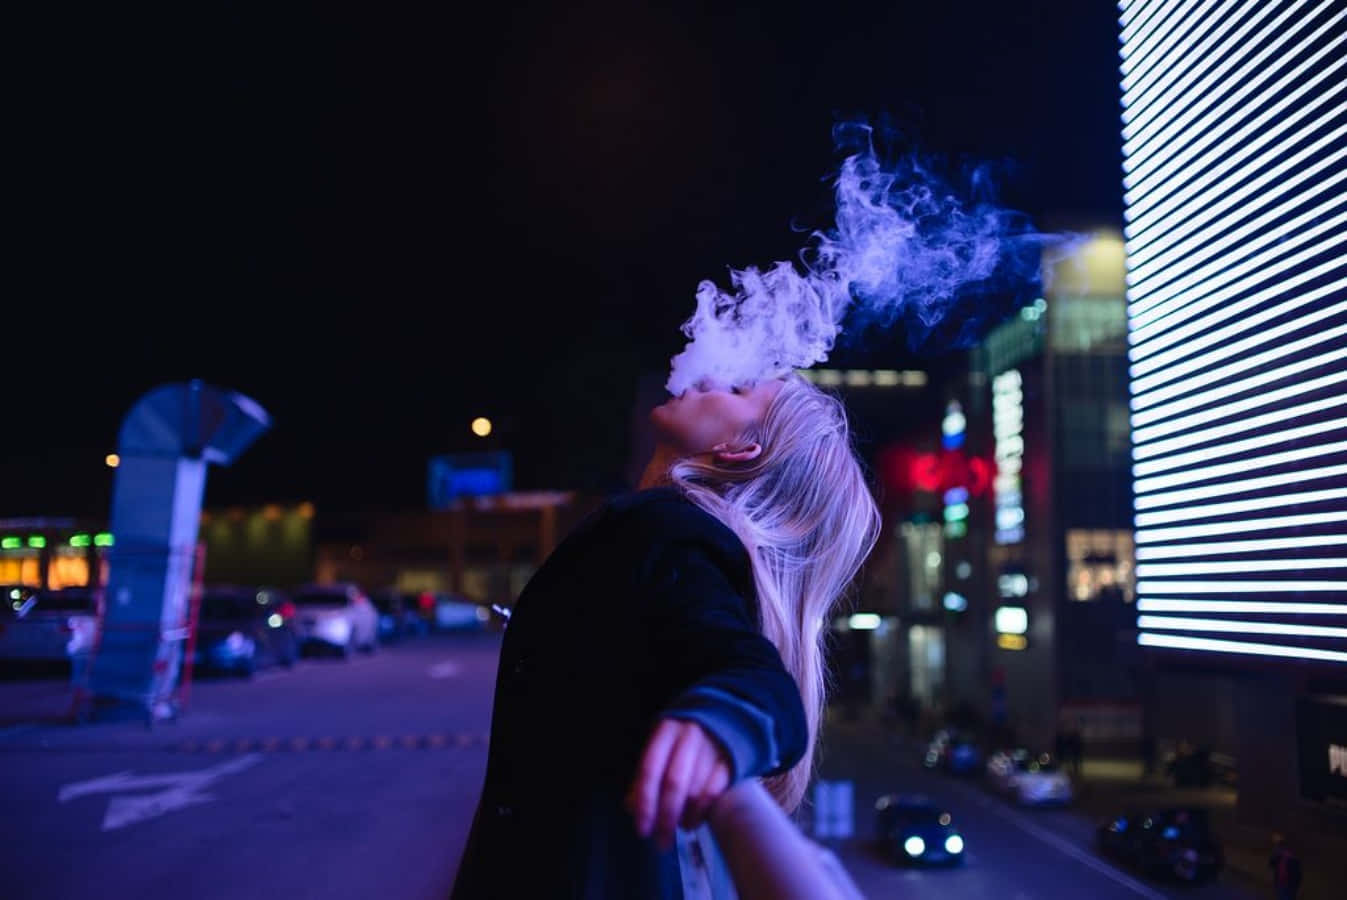 A Woman Smoking A Cigarette In The City At Night